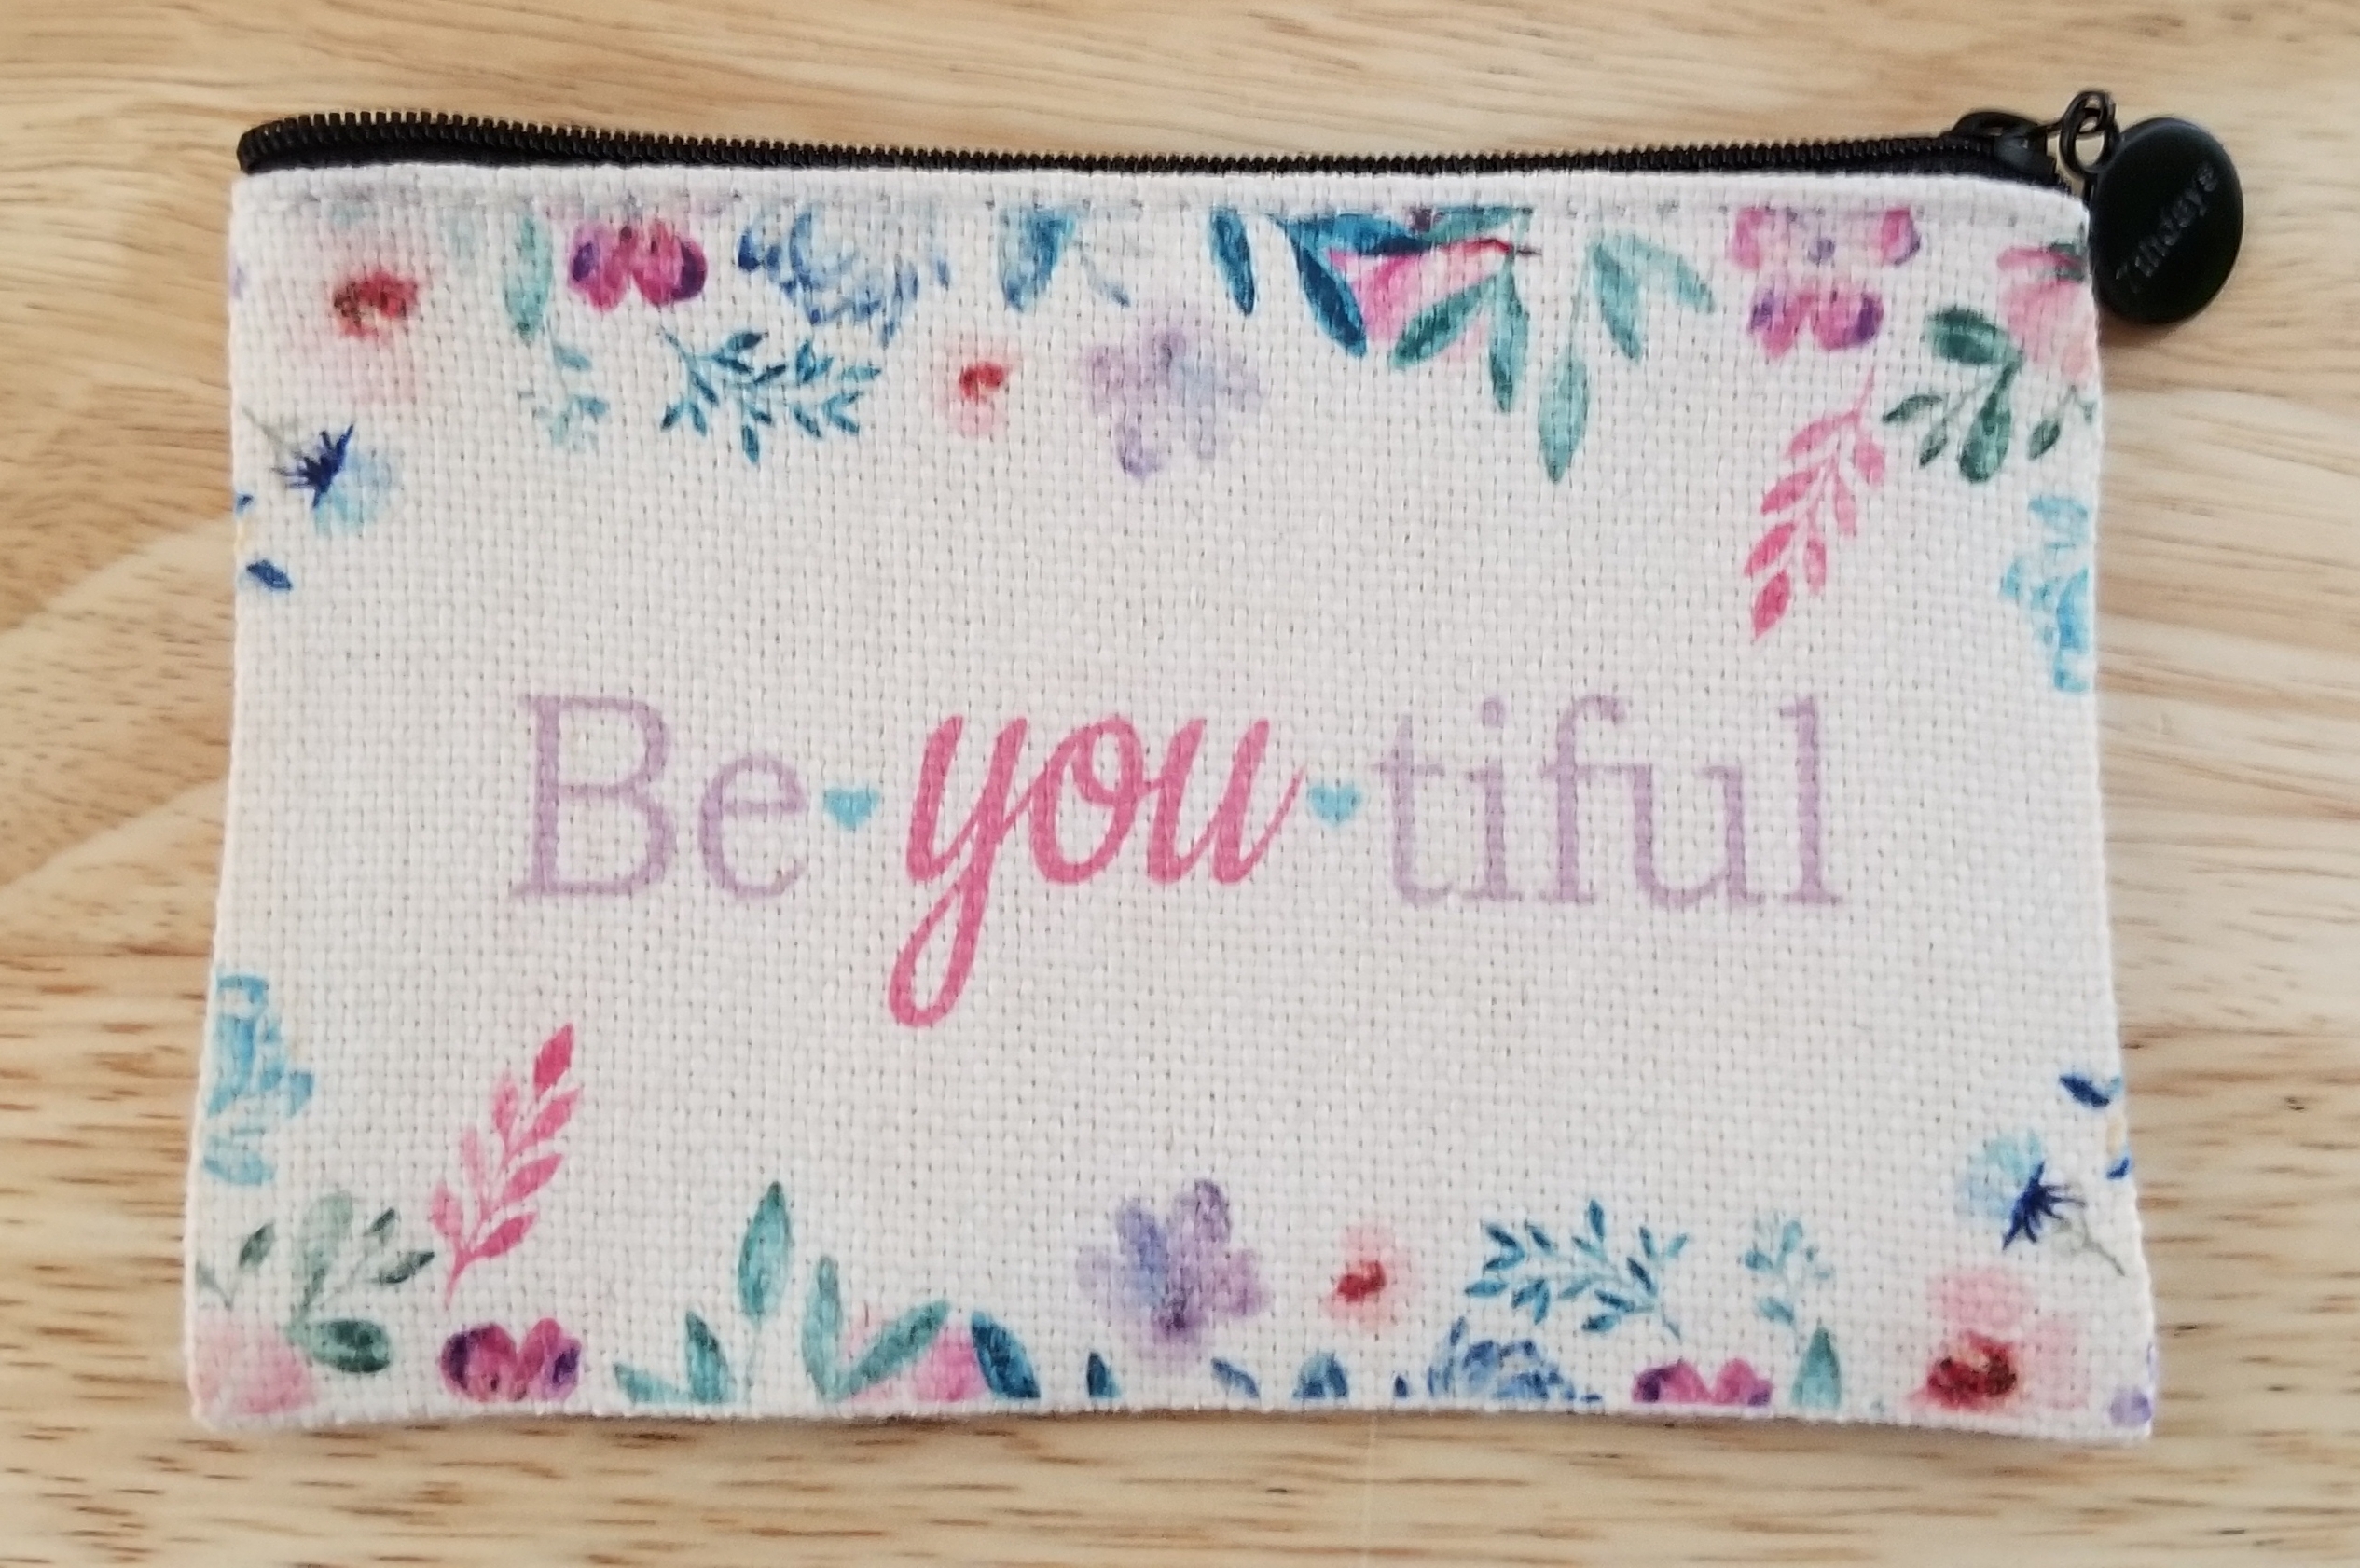 Be YOU tiful made with sublimation printing